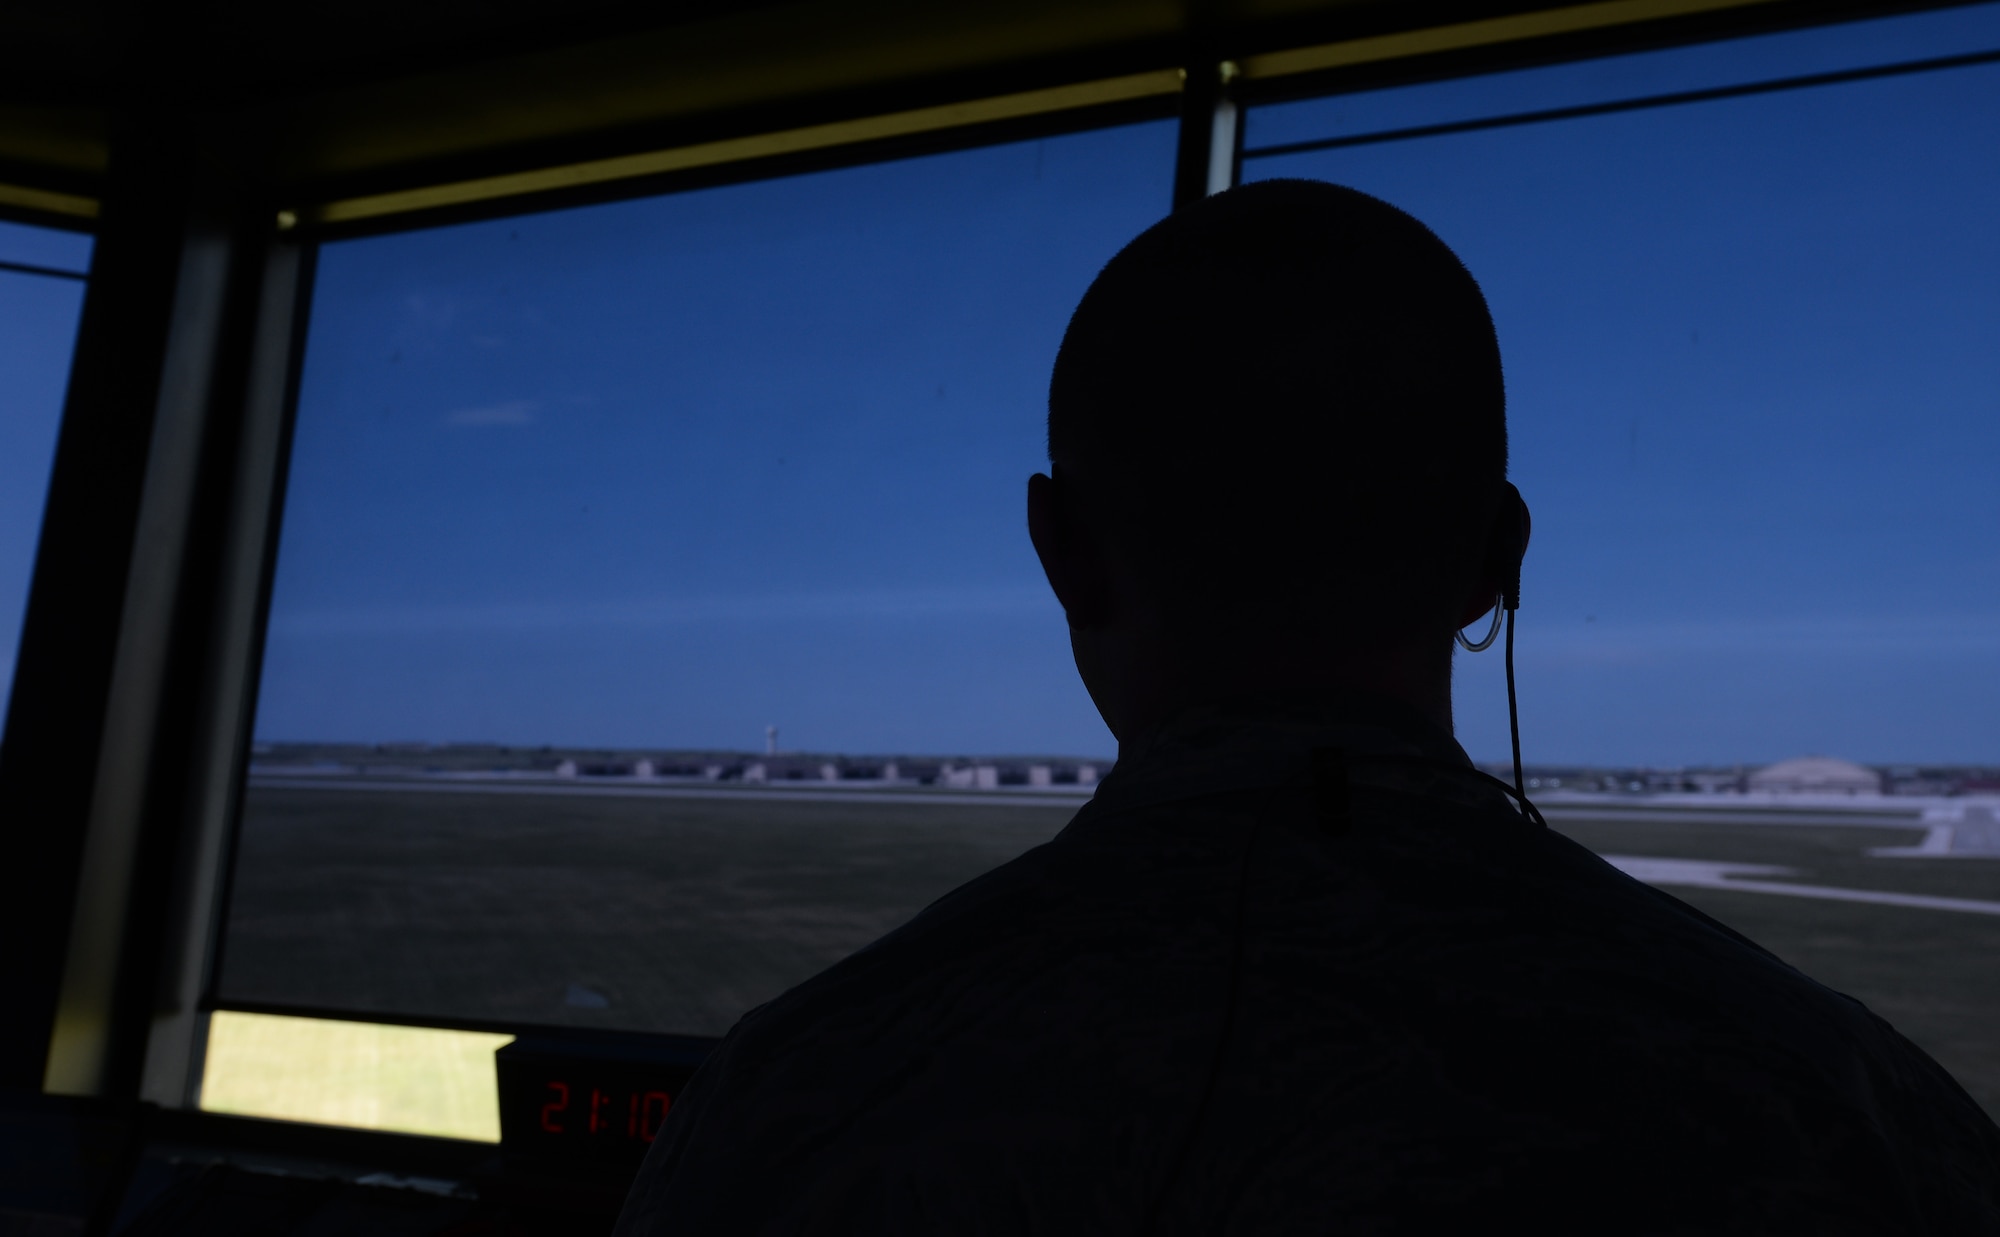 Senior Airman Grant Krause, a 28th Operations Support Squadron air traffic control journeyman, looks at the flight line through blue shaded blinds inside the air traffic control tower at Ellsworth Air Force Base, S.D., July 10, 2018. Due to the high-stress nature of the job, the air traffic controller’s technical training attrition rate is only 50 percent, making the success of their job even more crucial. (U.S. Air Force photo by Airman 1st Class Nicolas Z. Erwin)